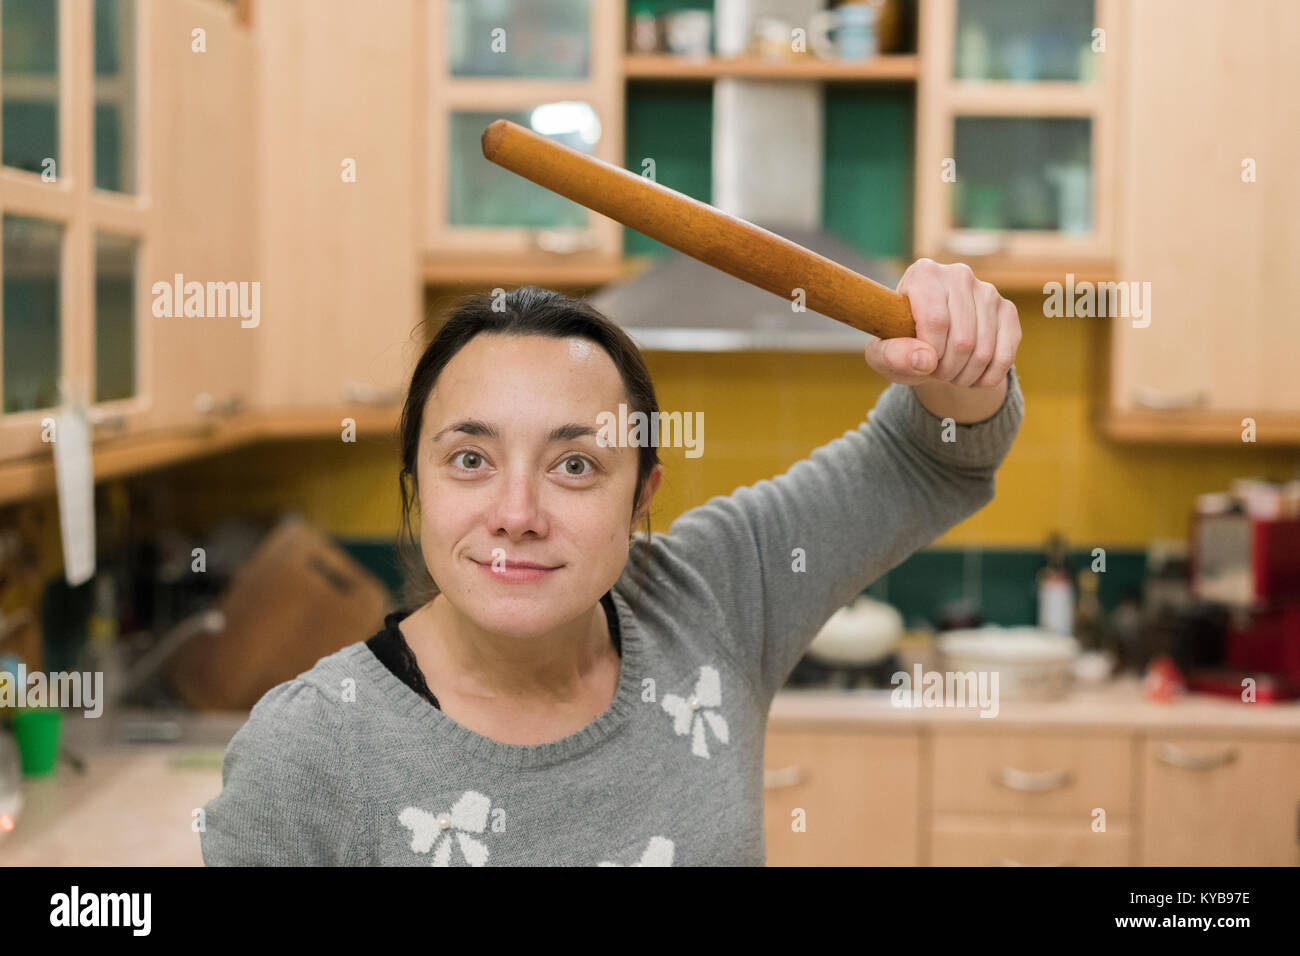 young and pretty angry housewife with a rolling pin in her hand Stock Photo